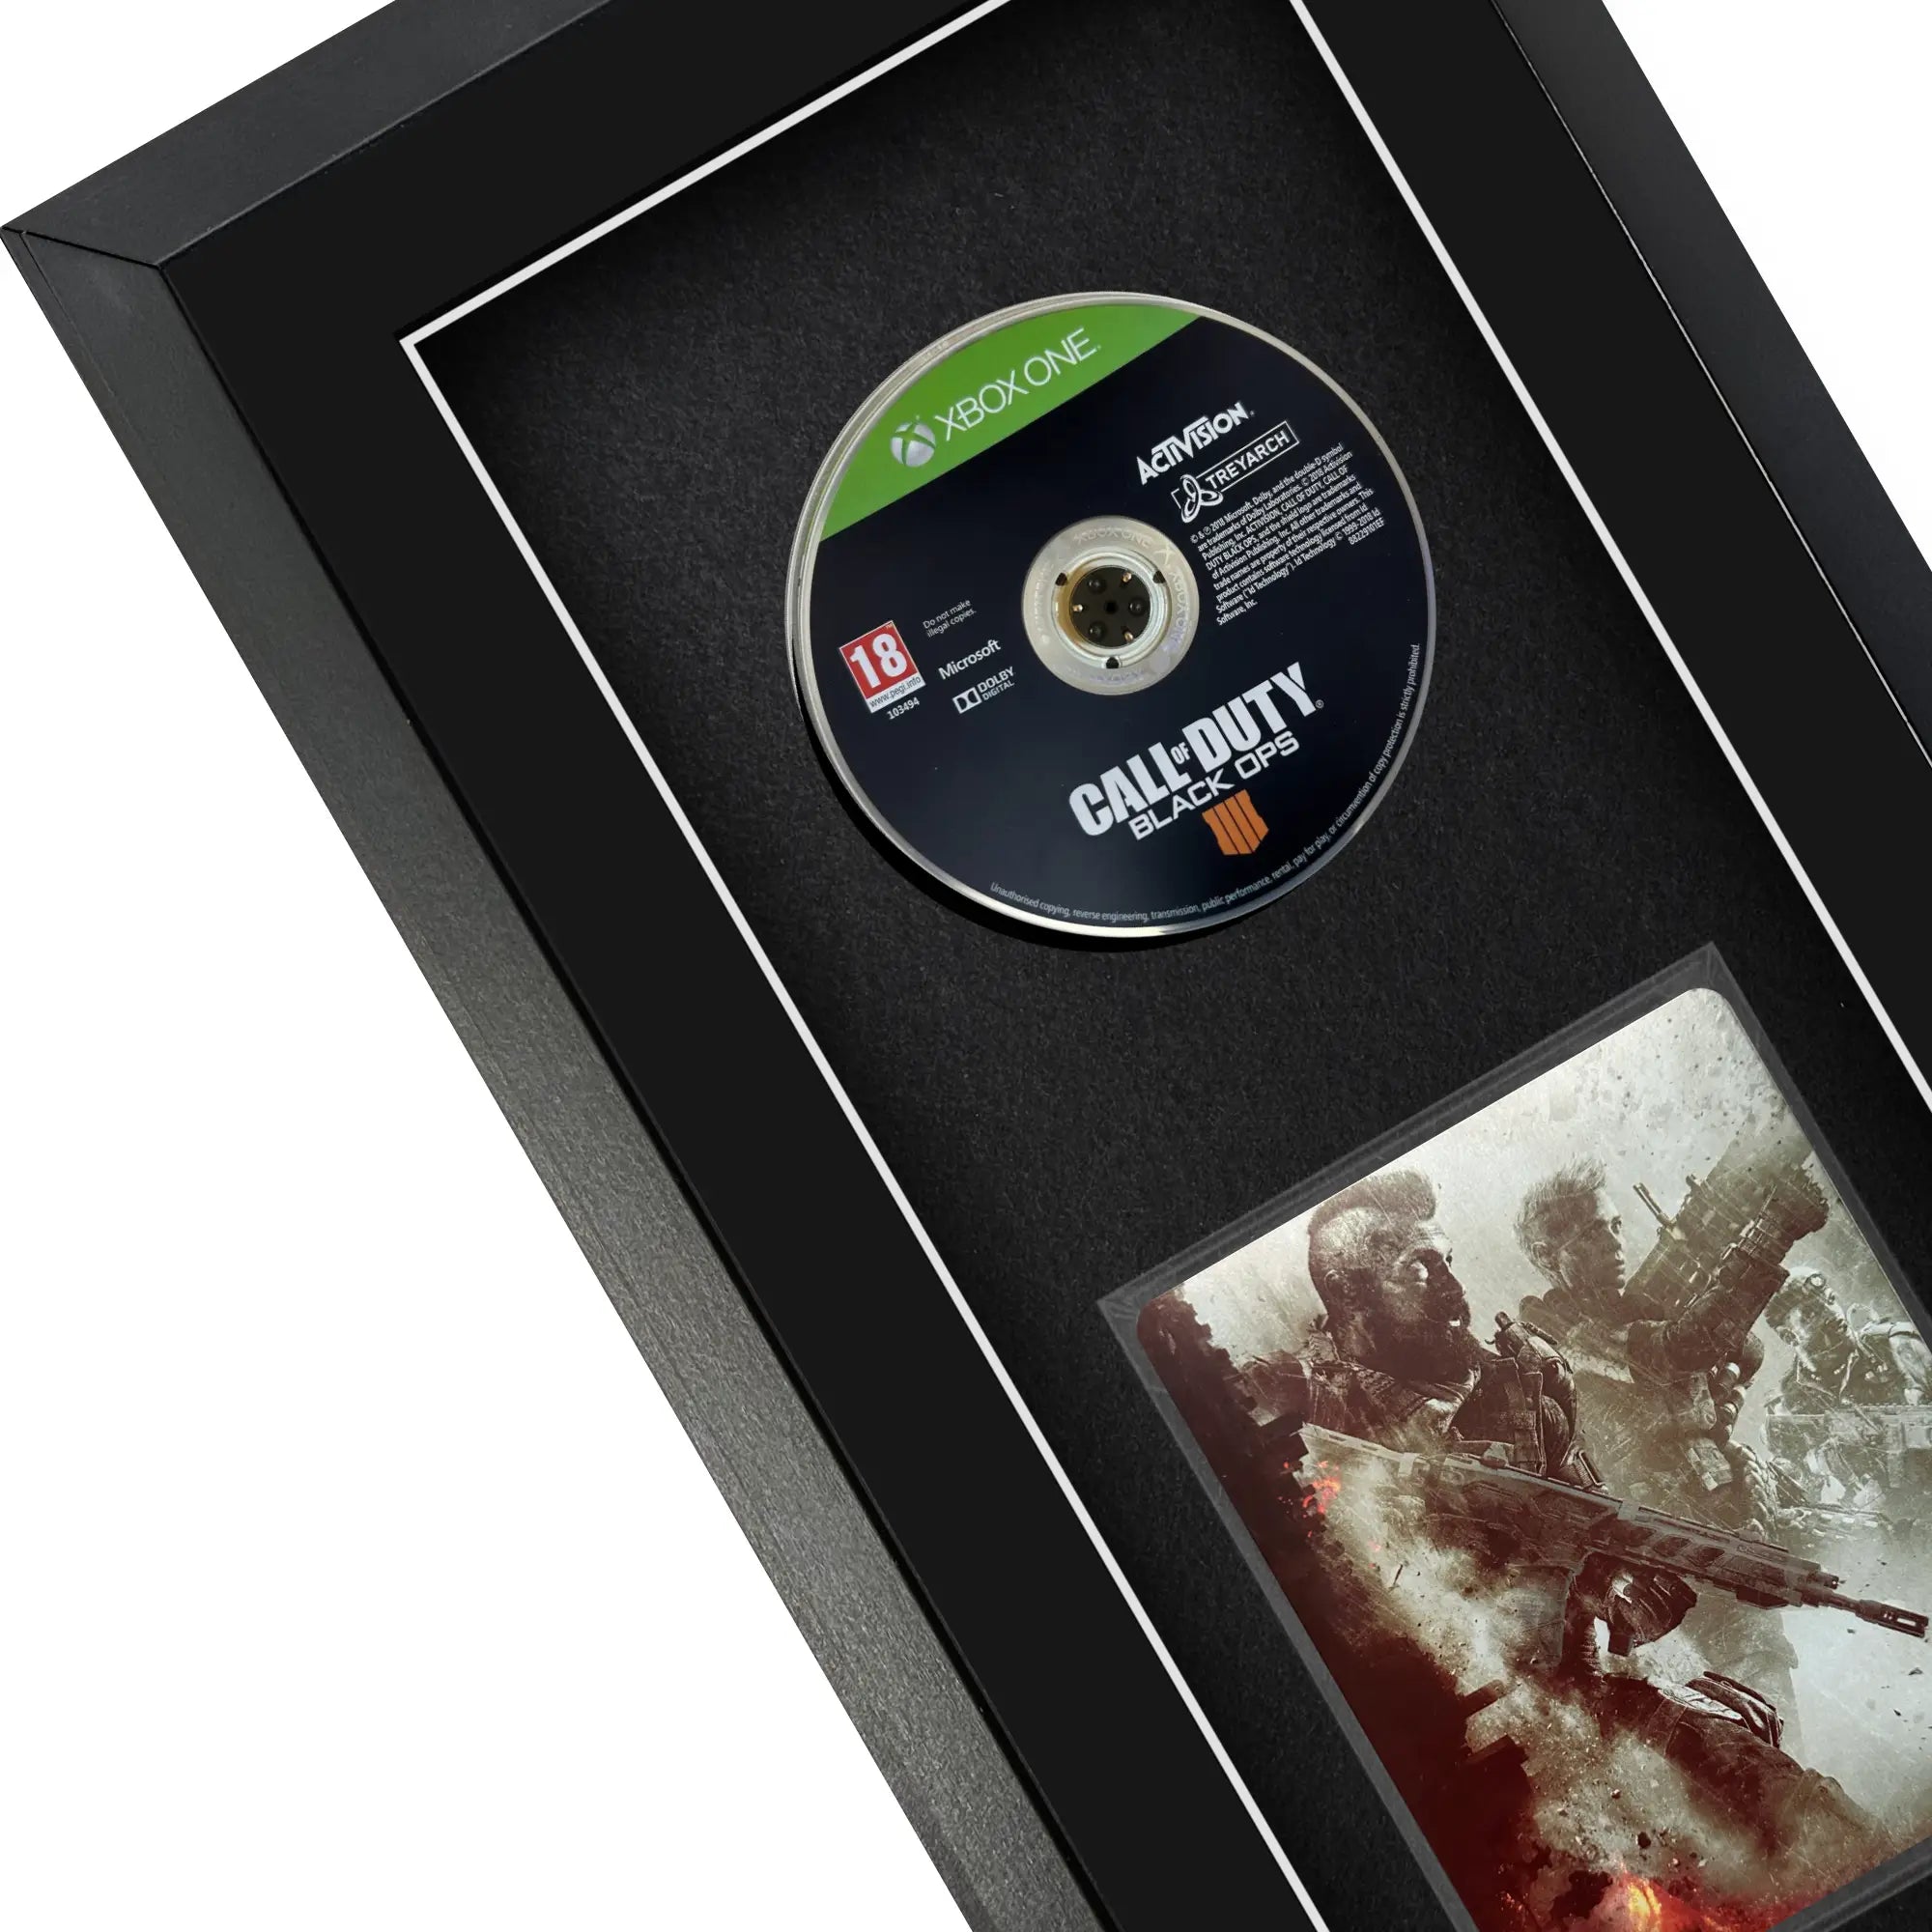 Frame your own Xbox One and Series X steelbook game to be displayed within this frame, the perfect way to showcase your game